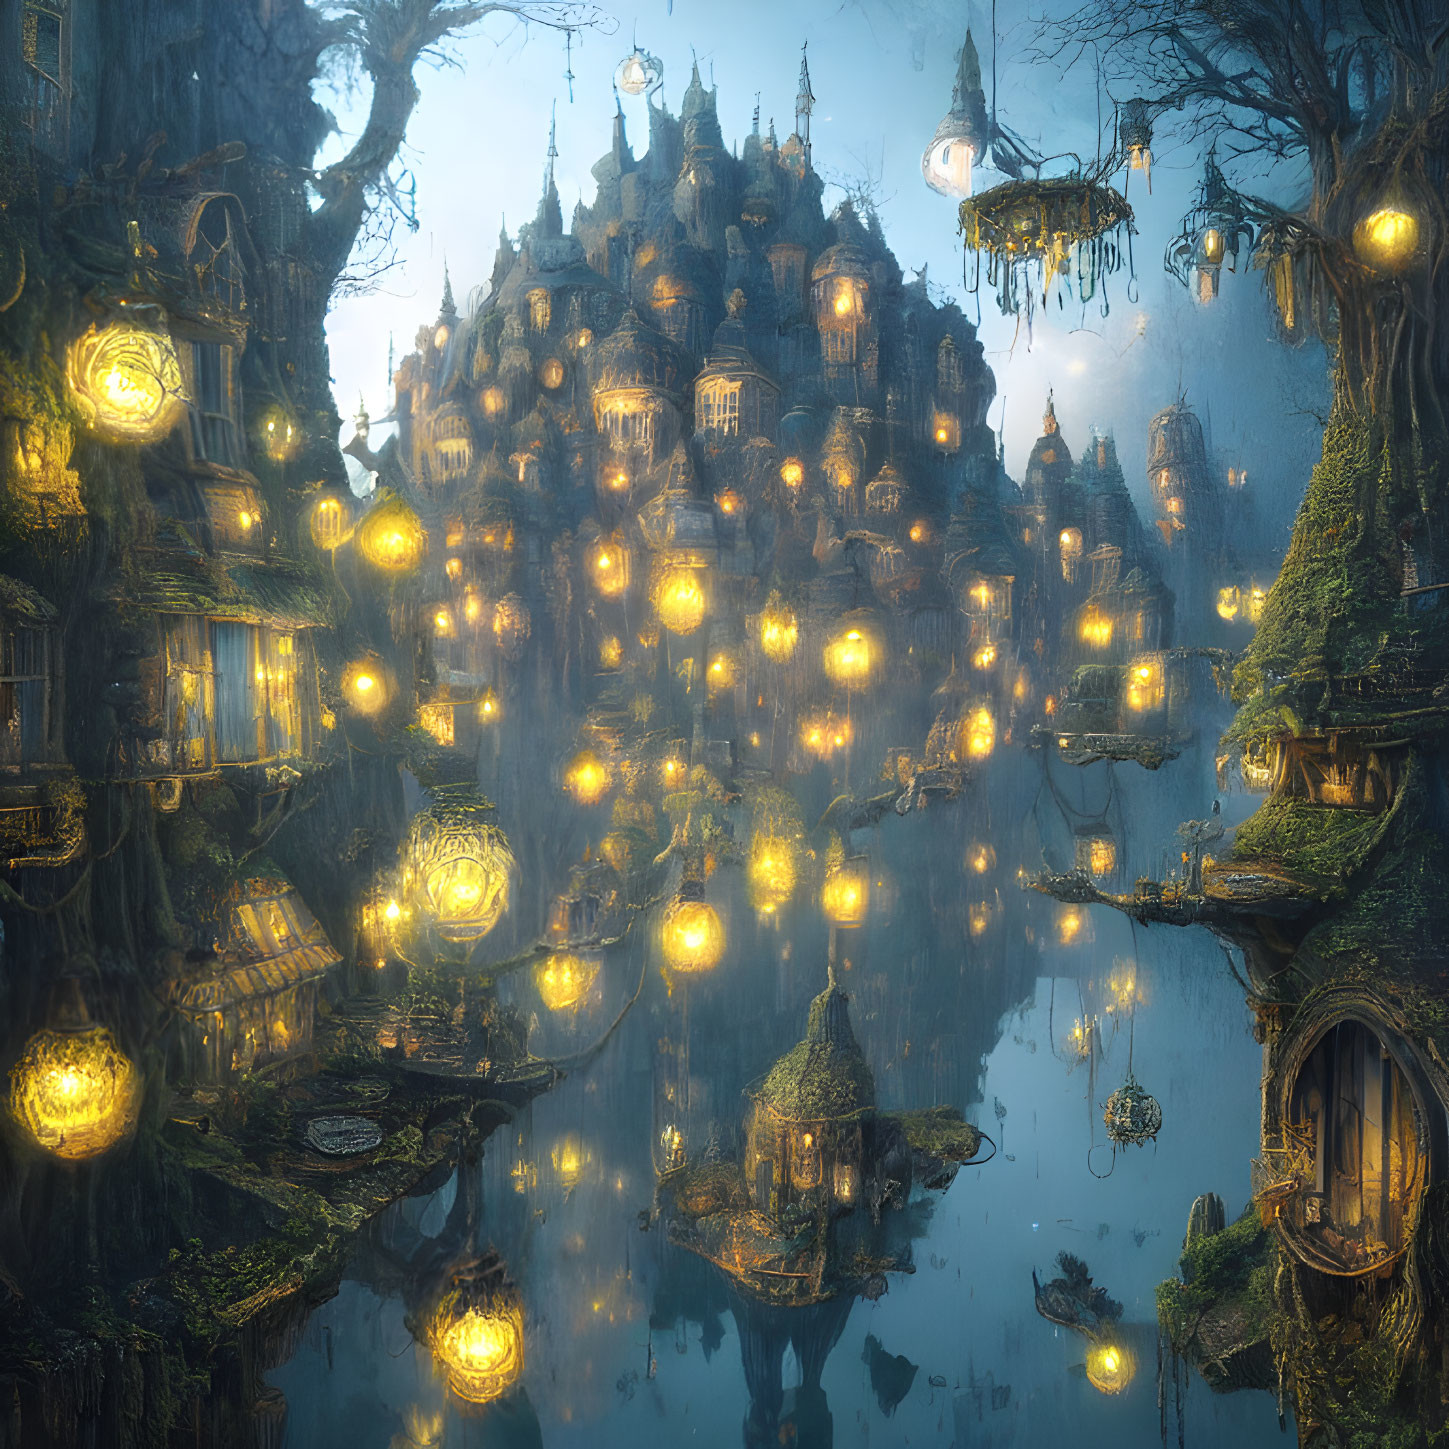 Enchanting tree city at twilight with glowing lights and intricate architecture